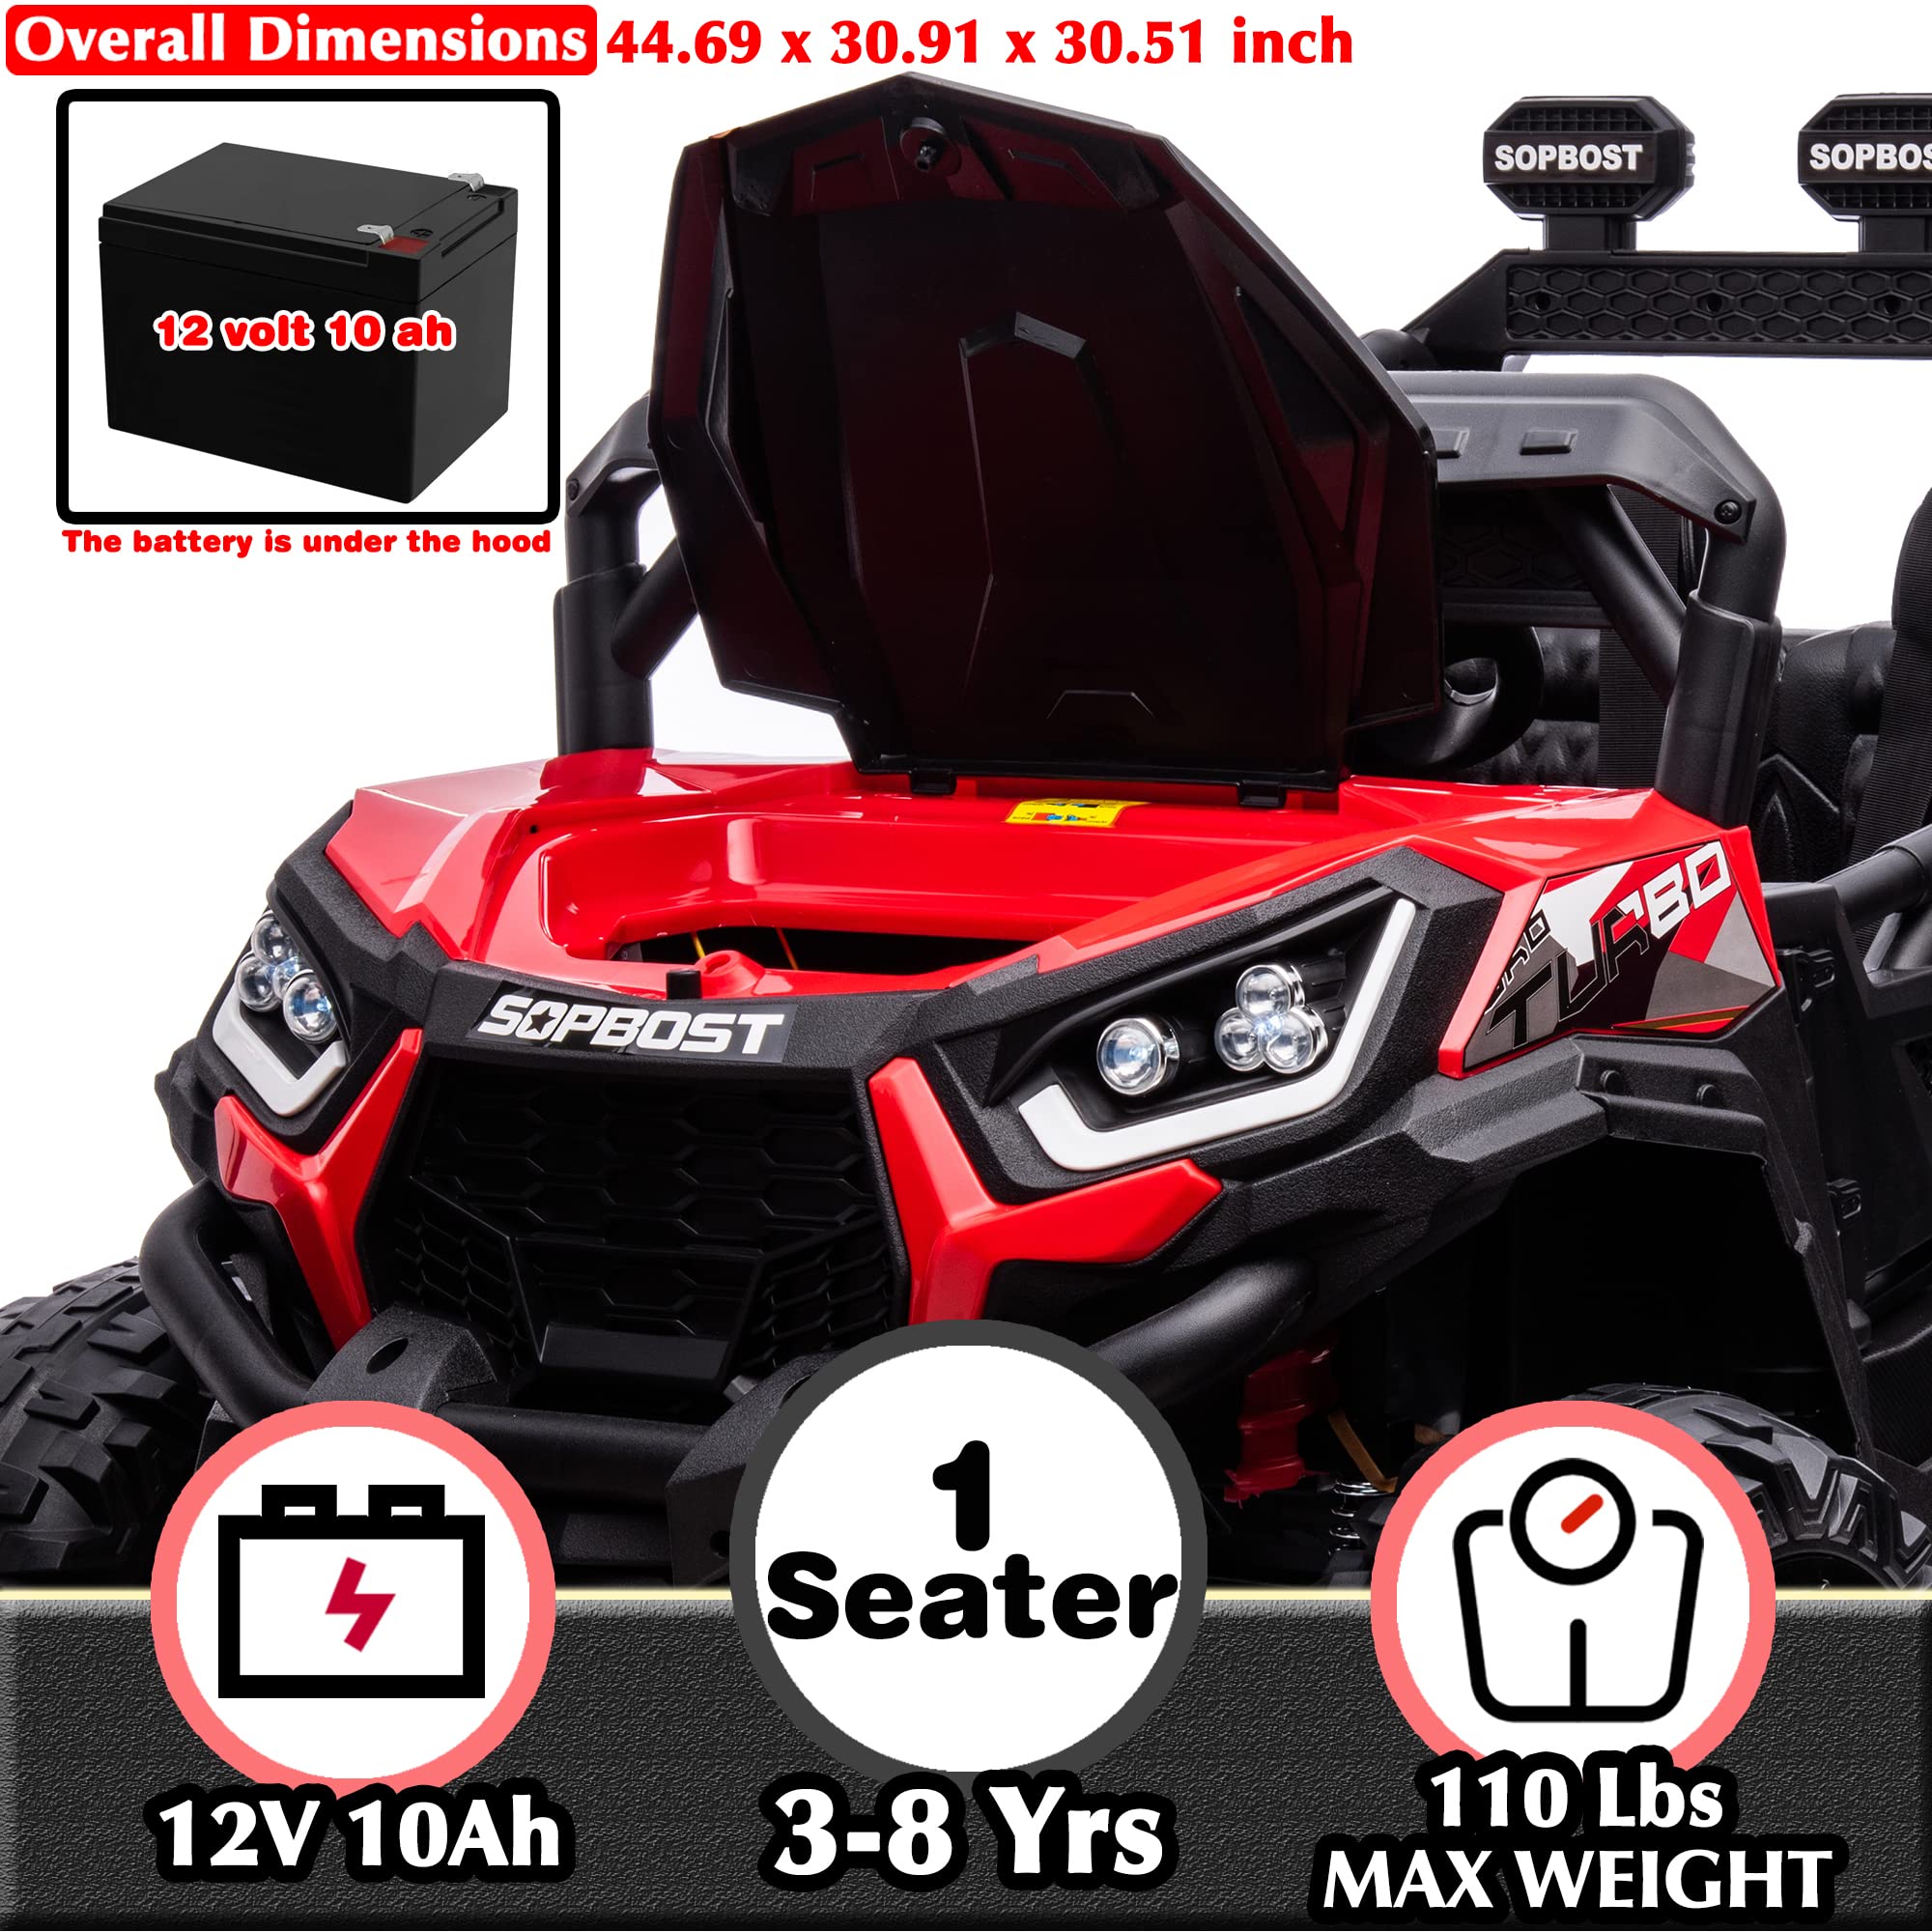 sopbost 12V 10AH Power Buggy 4x4 Kids Ride On Truck UTV 2WD/4WD Switchable Ride On Car with Remote Control Ride On Toys Electric Off-Road UTV Vehicle with Car Keys, 4 Shock Absorbers, Music Play, Red